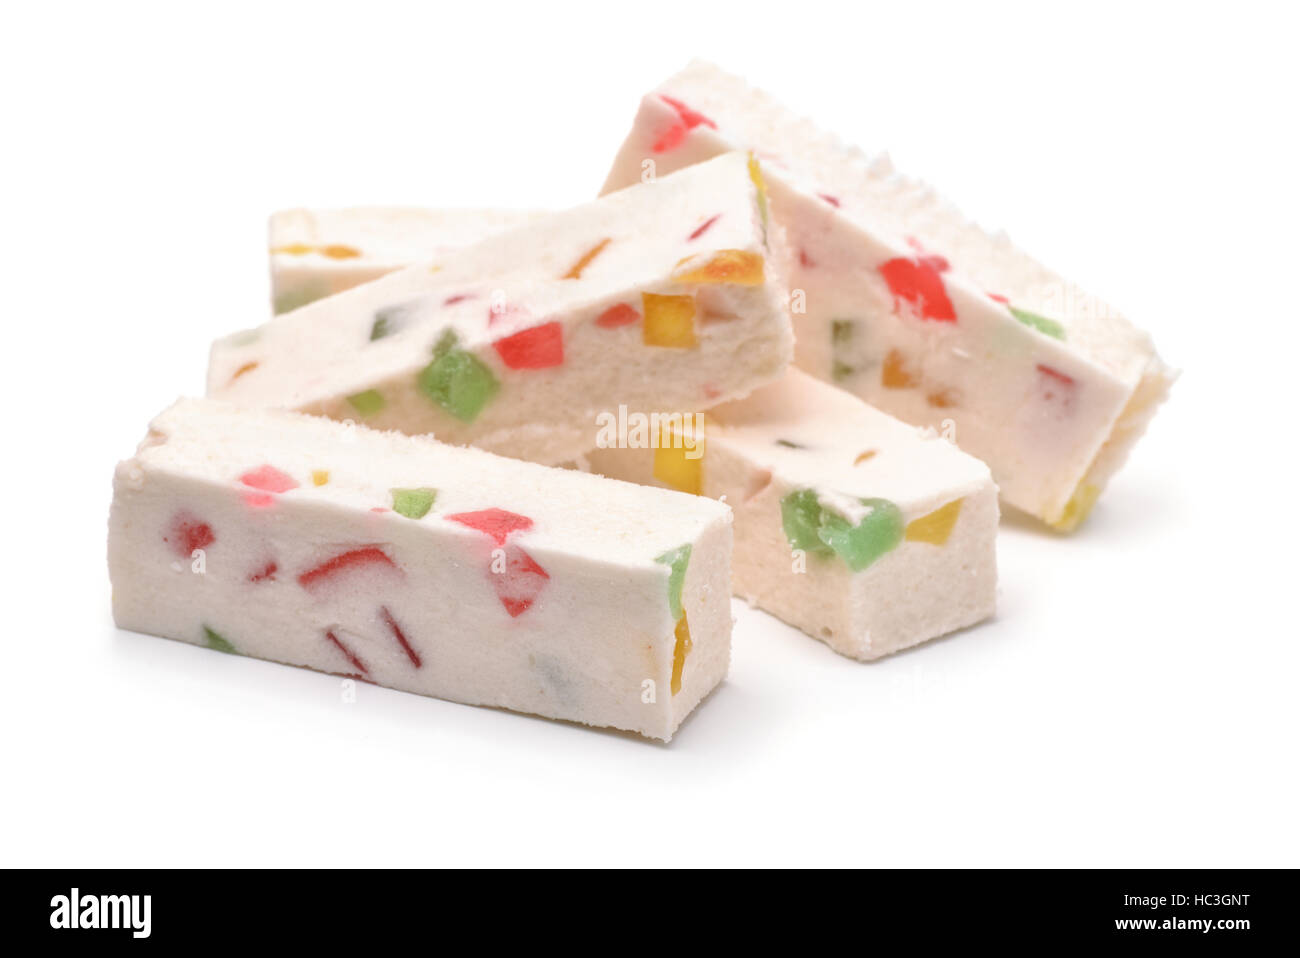 Nougat fruits sticks isolated on white Banque D'Images